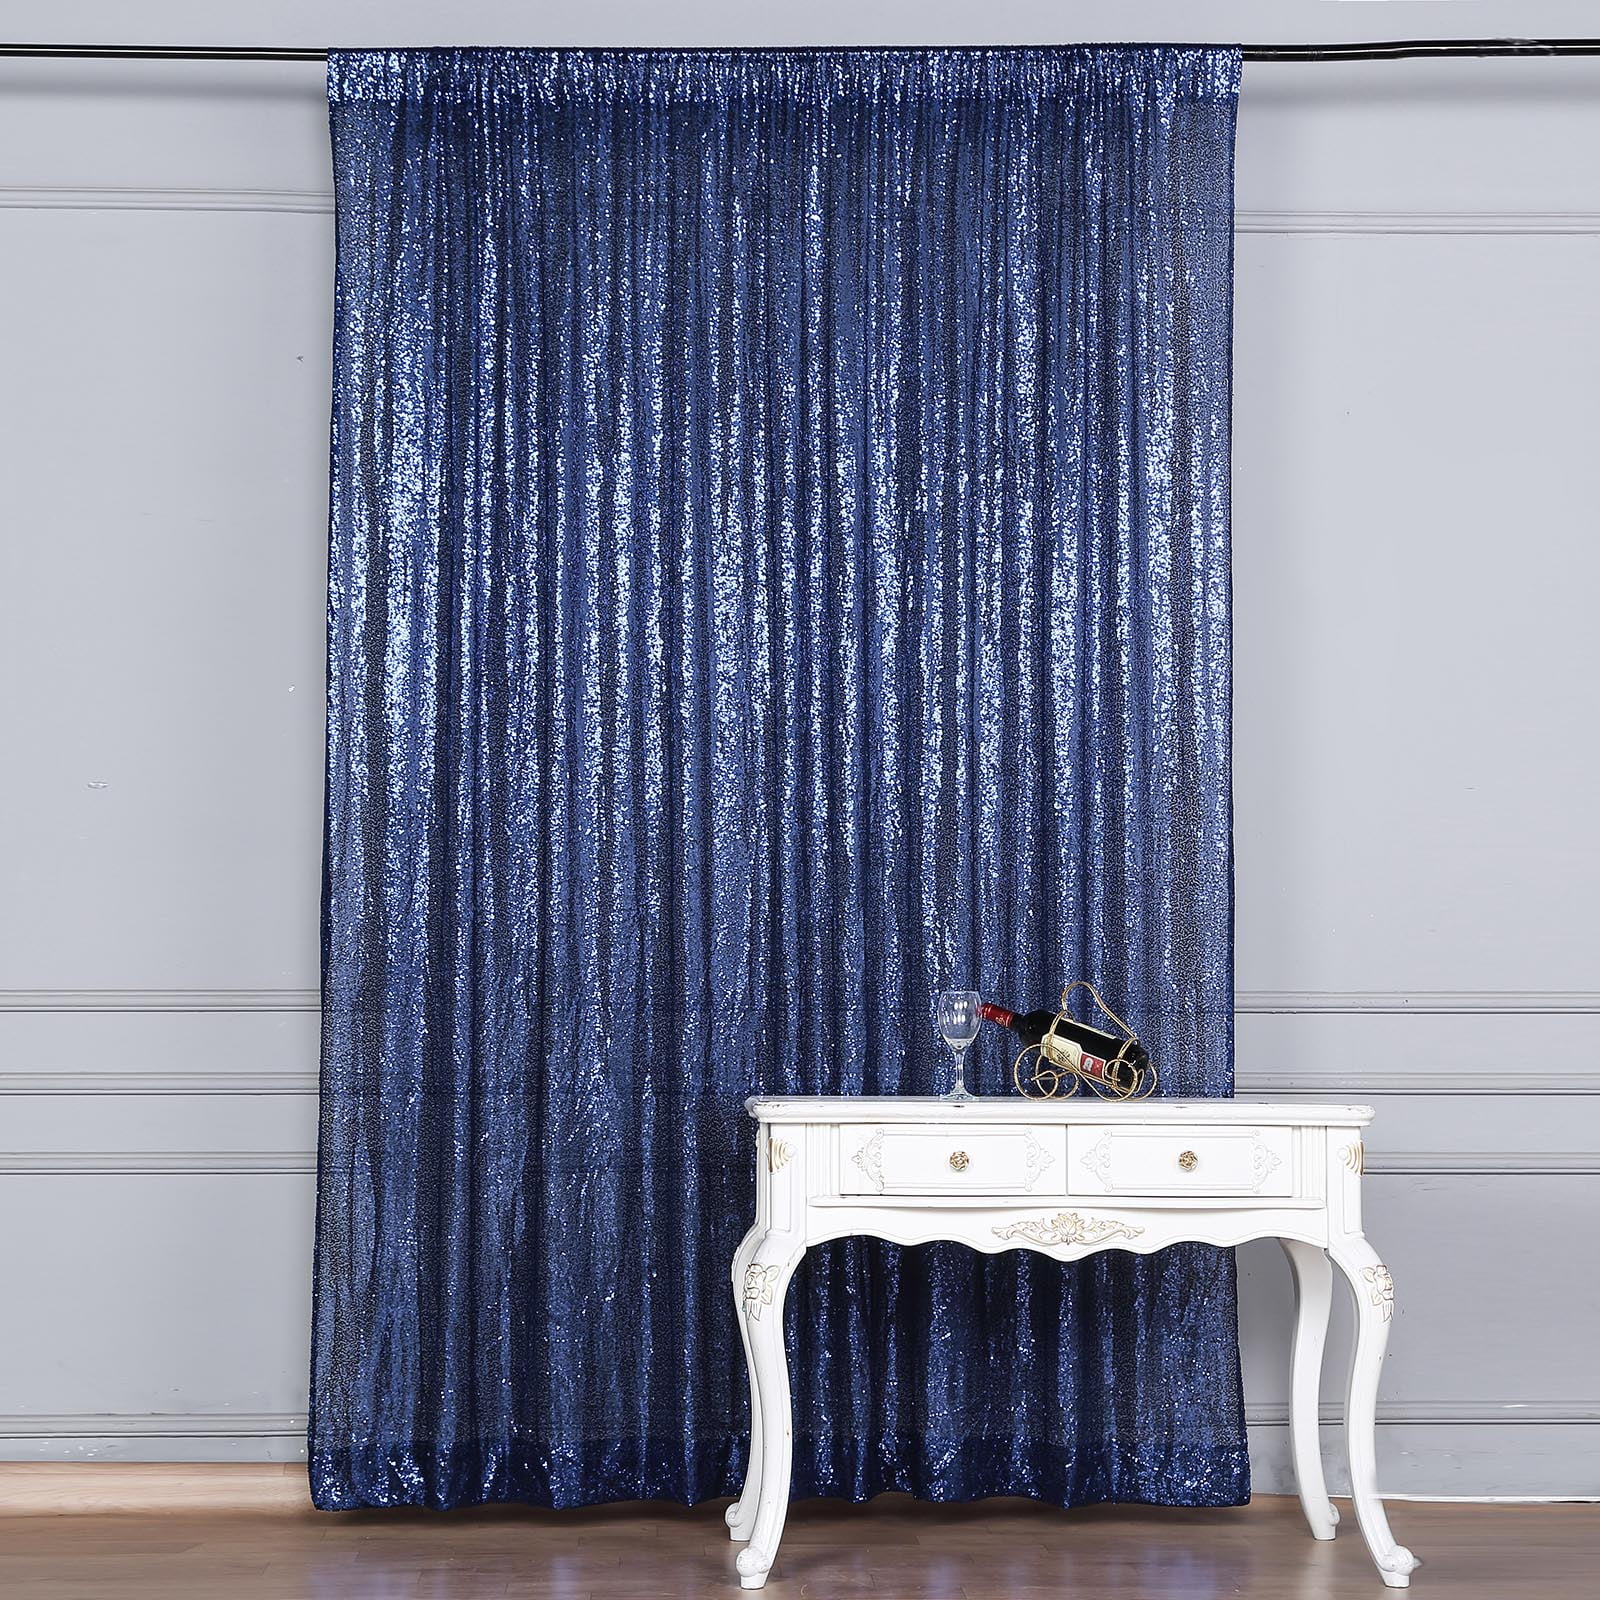 Navy blue fabric shower curtain 2.1m width new free shipping 